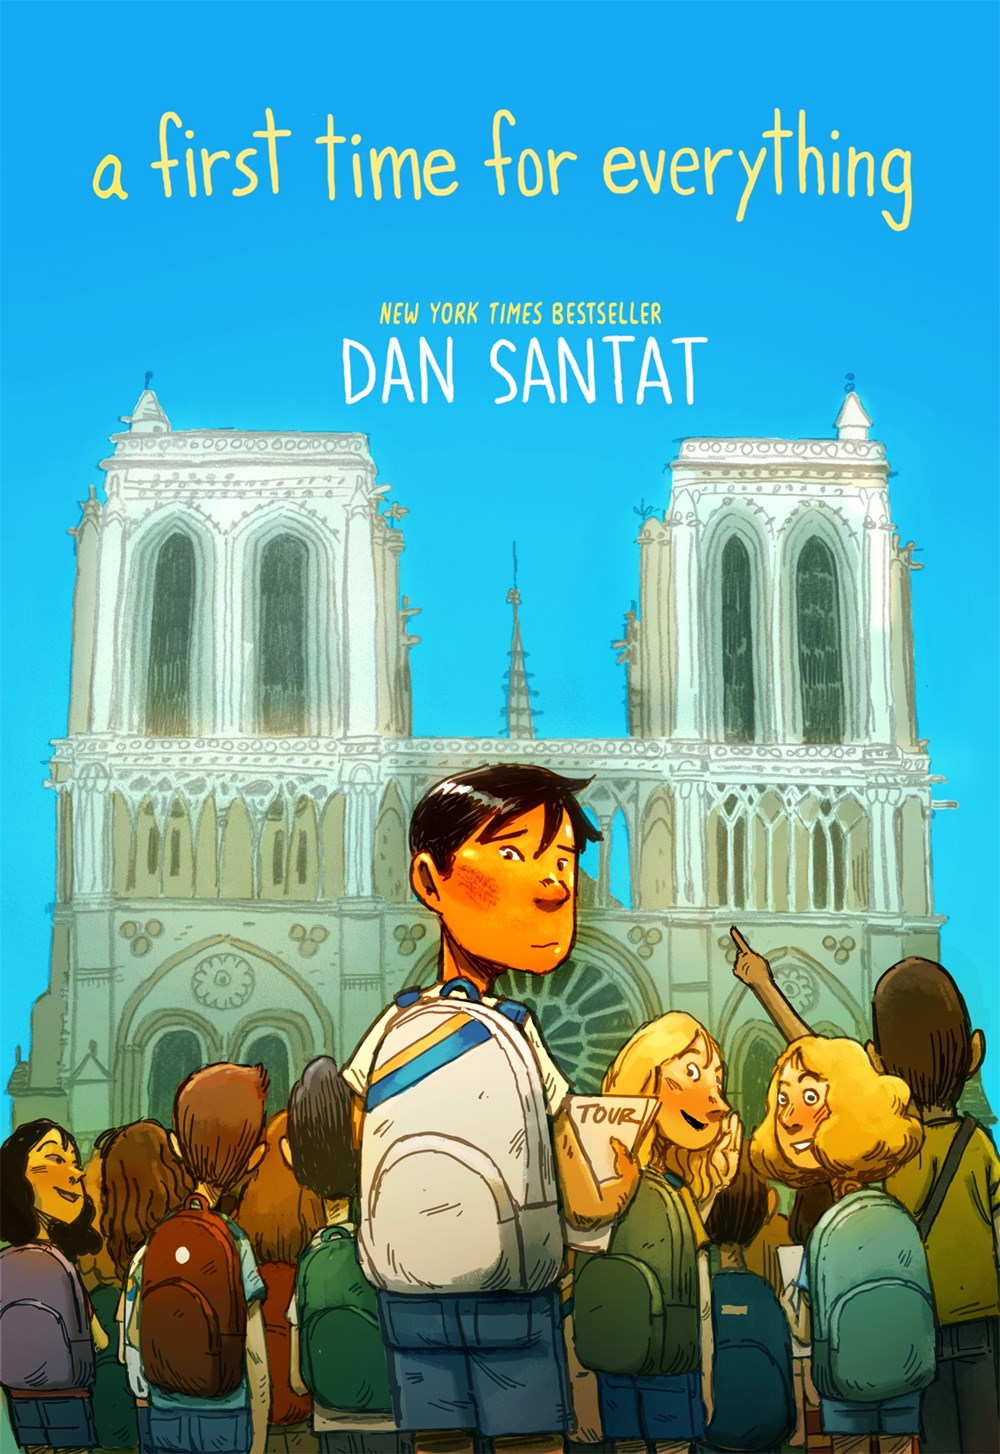 (Re) Making Memories: Dan Santat on A FIRST TIME FOR EVERYTHING